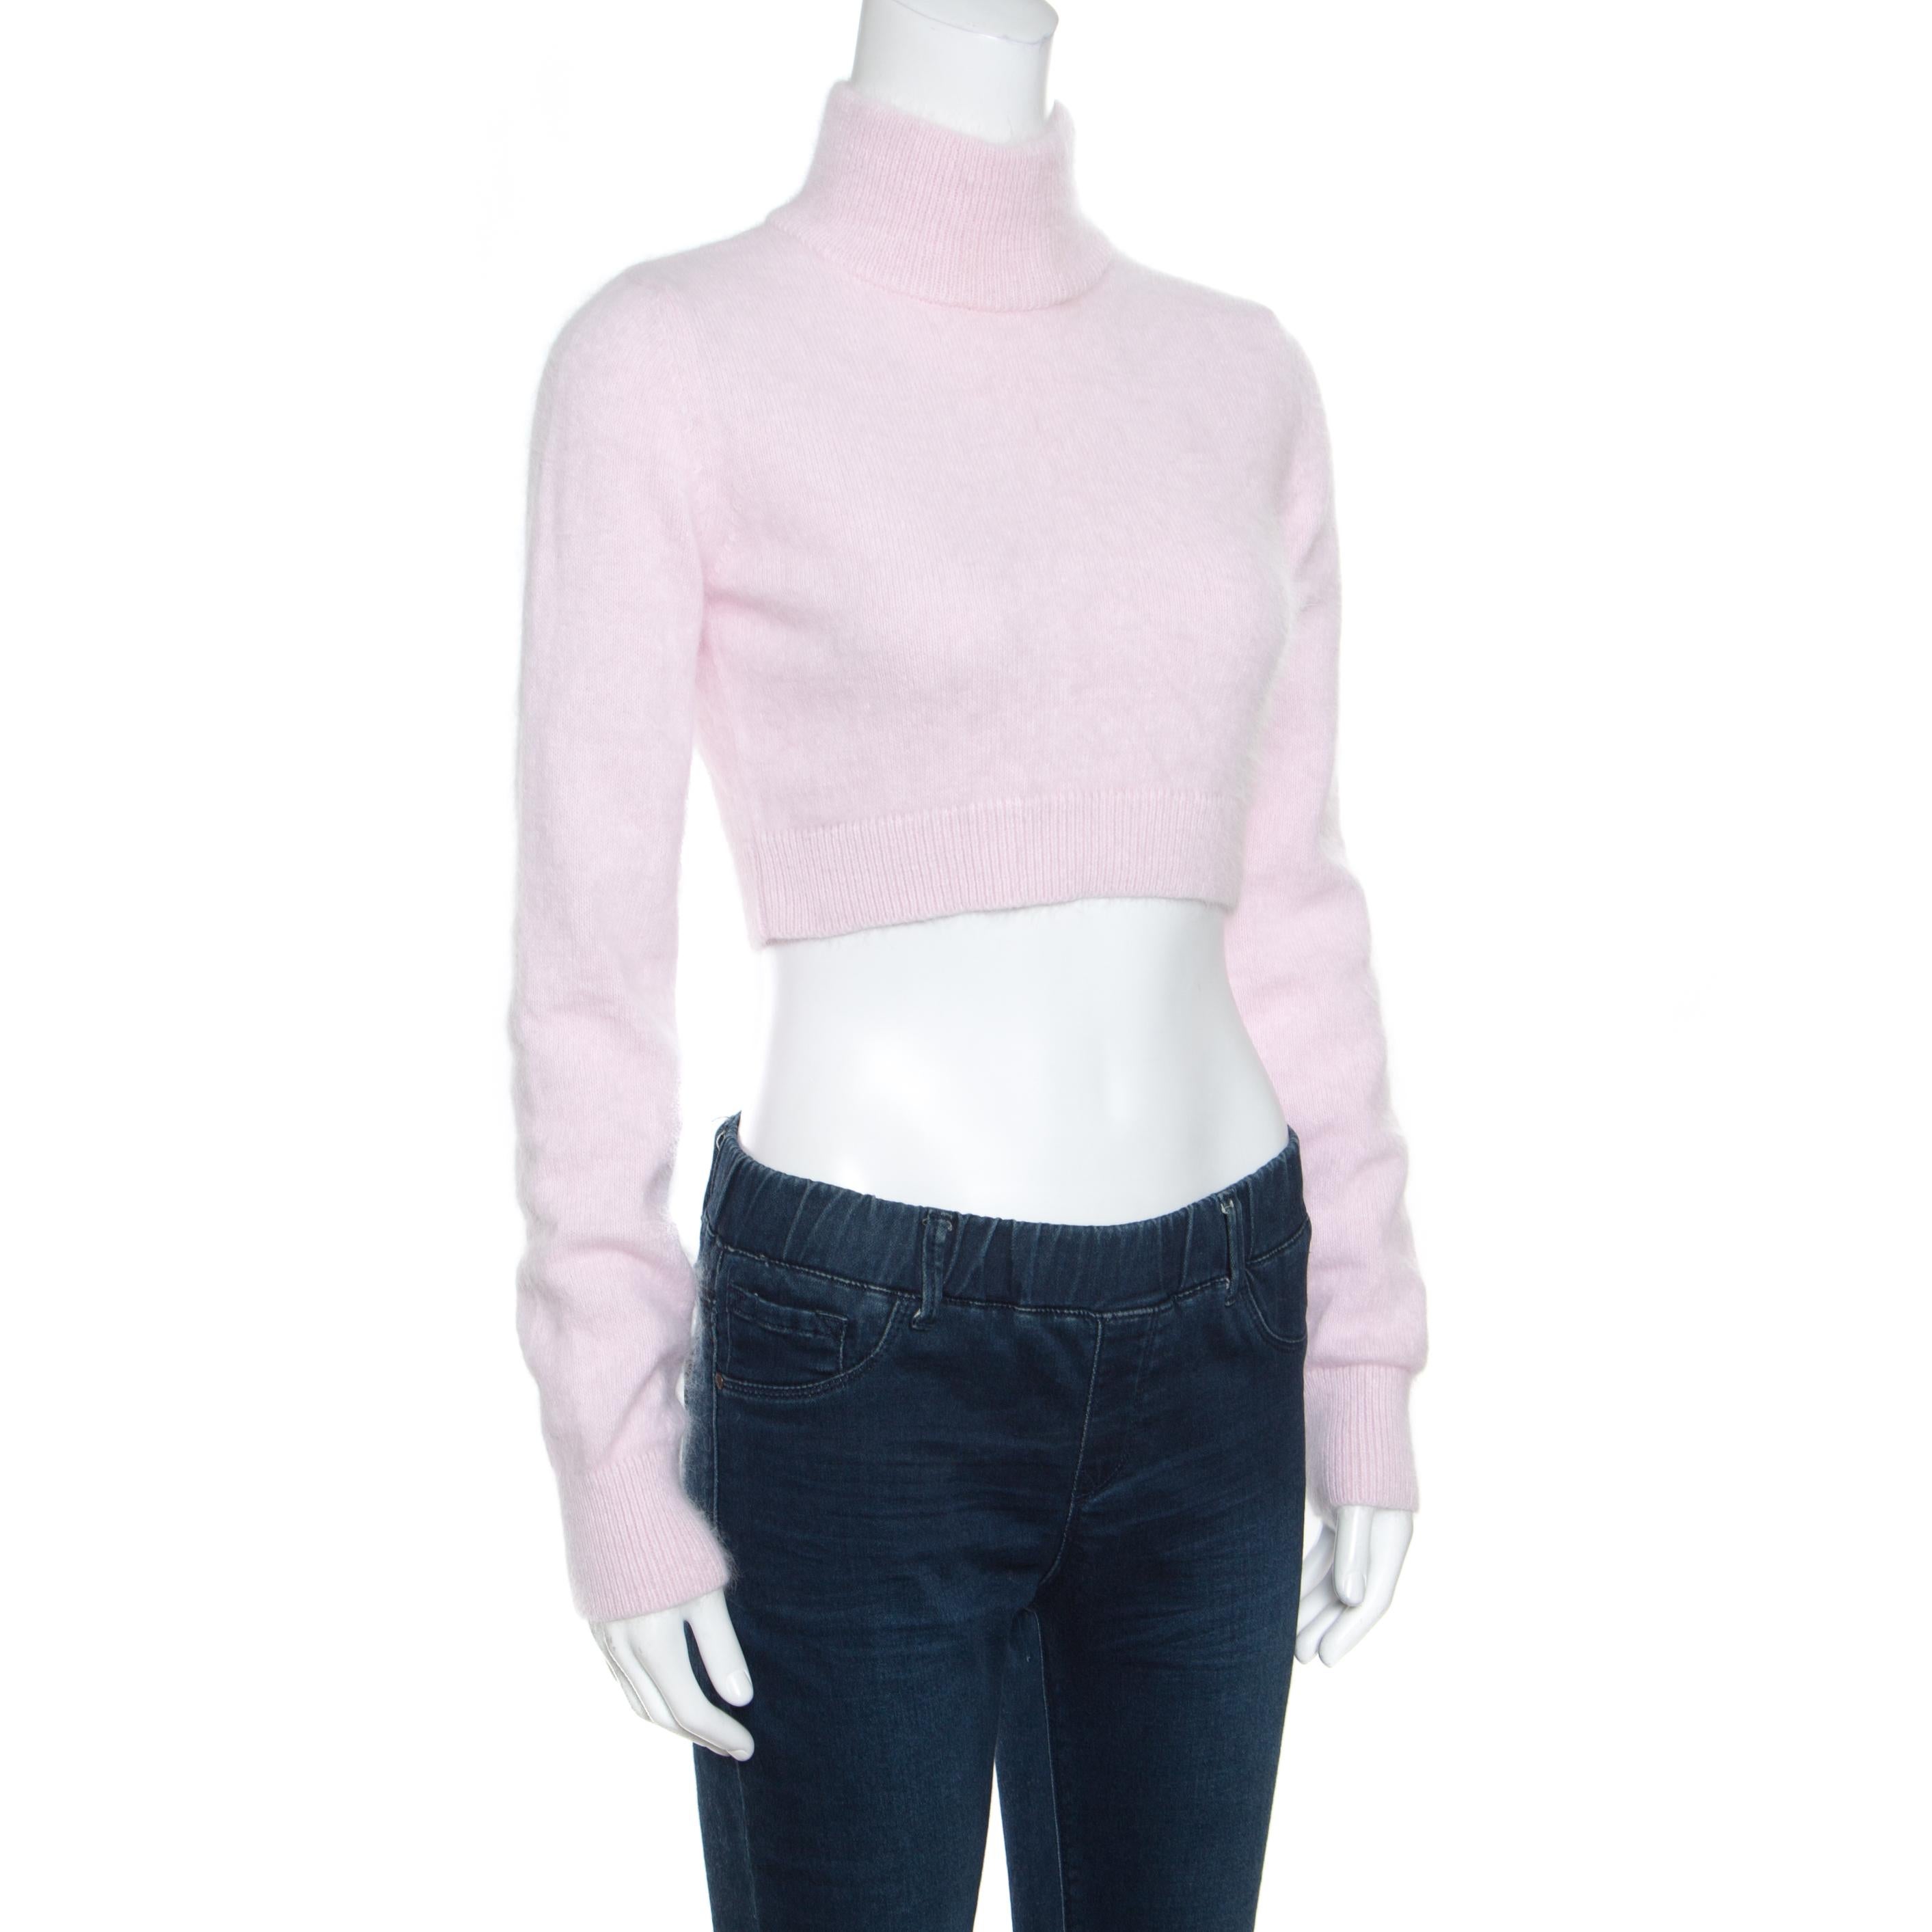 Stay warm and stylish at the same time in this fabulous sweater from Balmain. This pale pink sweater is made of a wool blend and features a cropped design. It flaunts a high neck and long sleeves. Pair it with denims and smart ankle boots for maig a